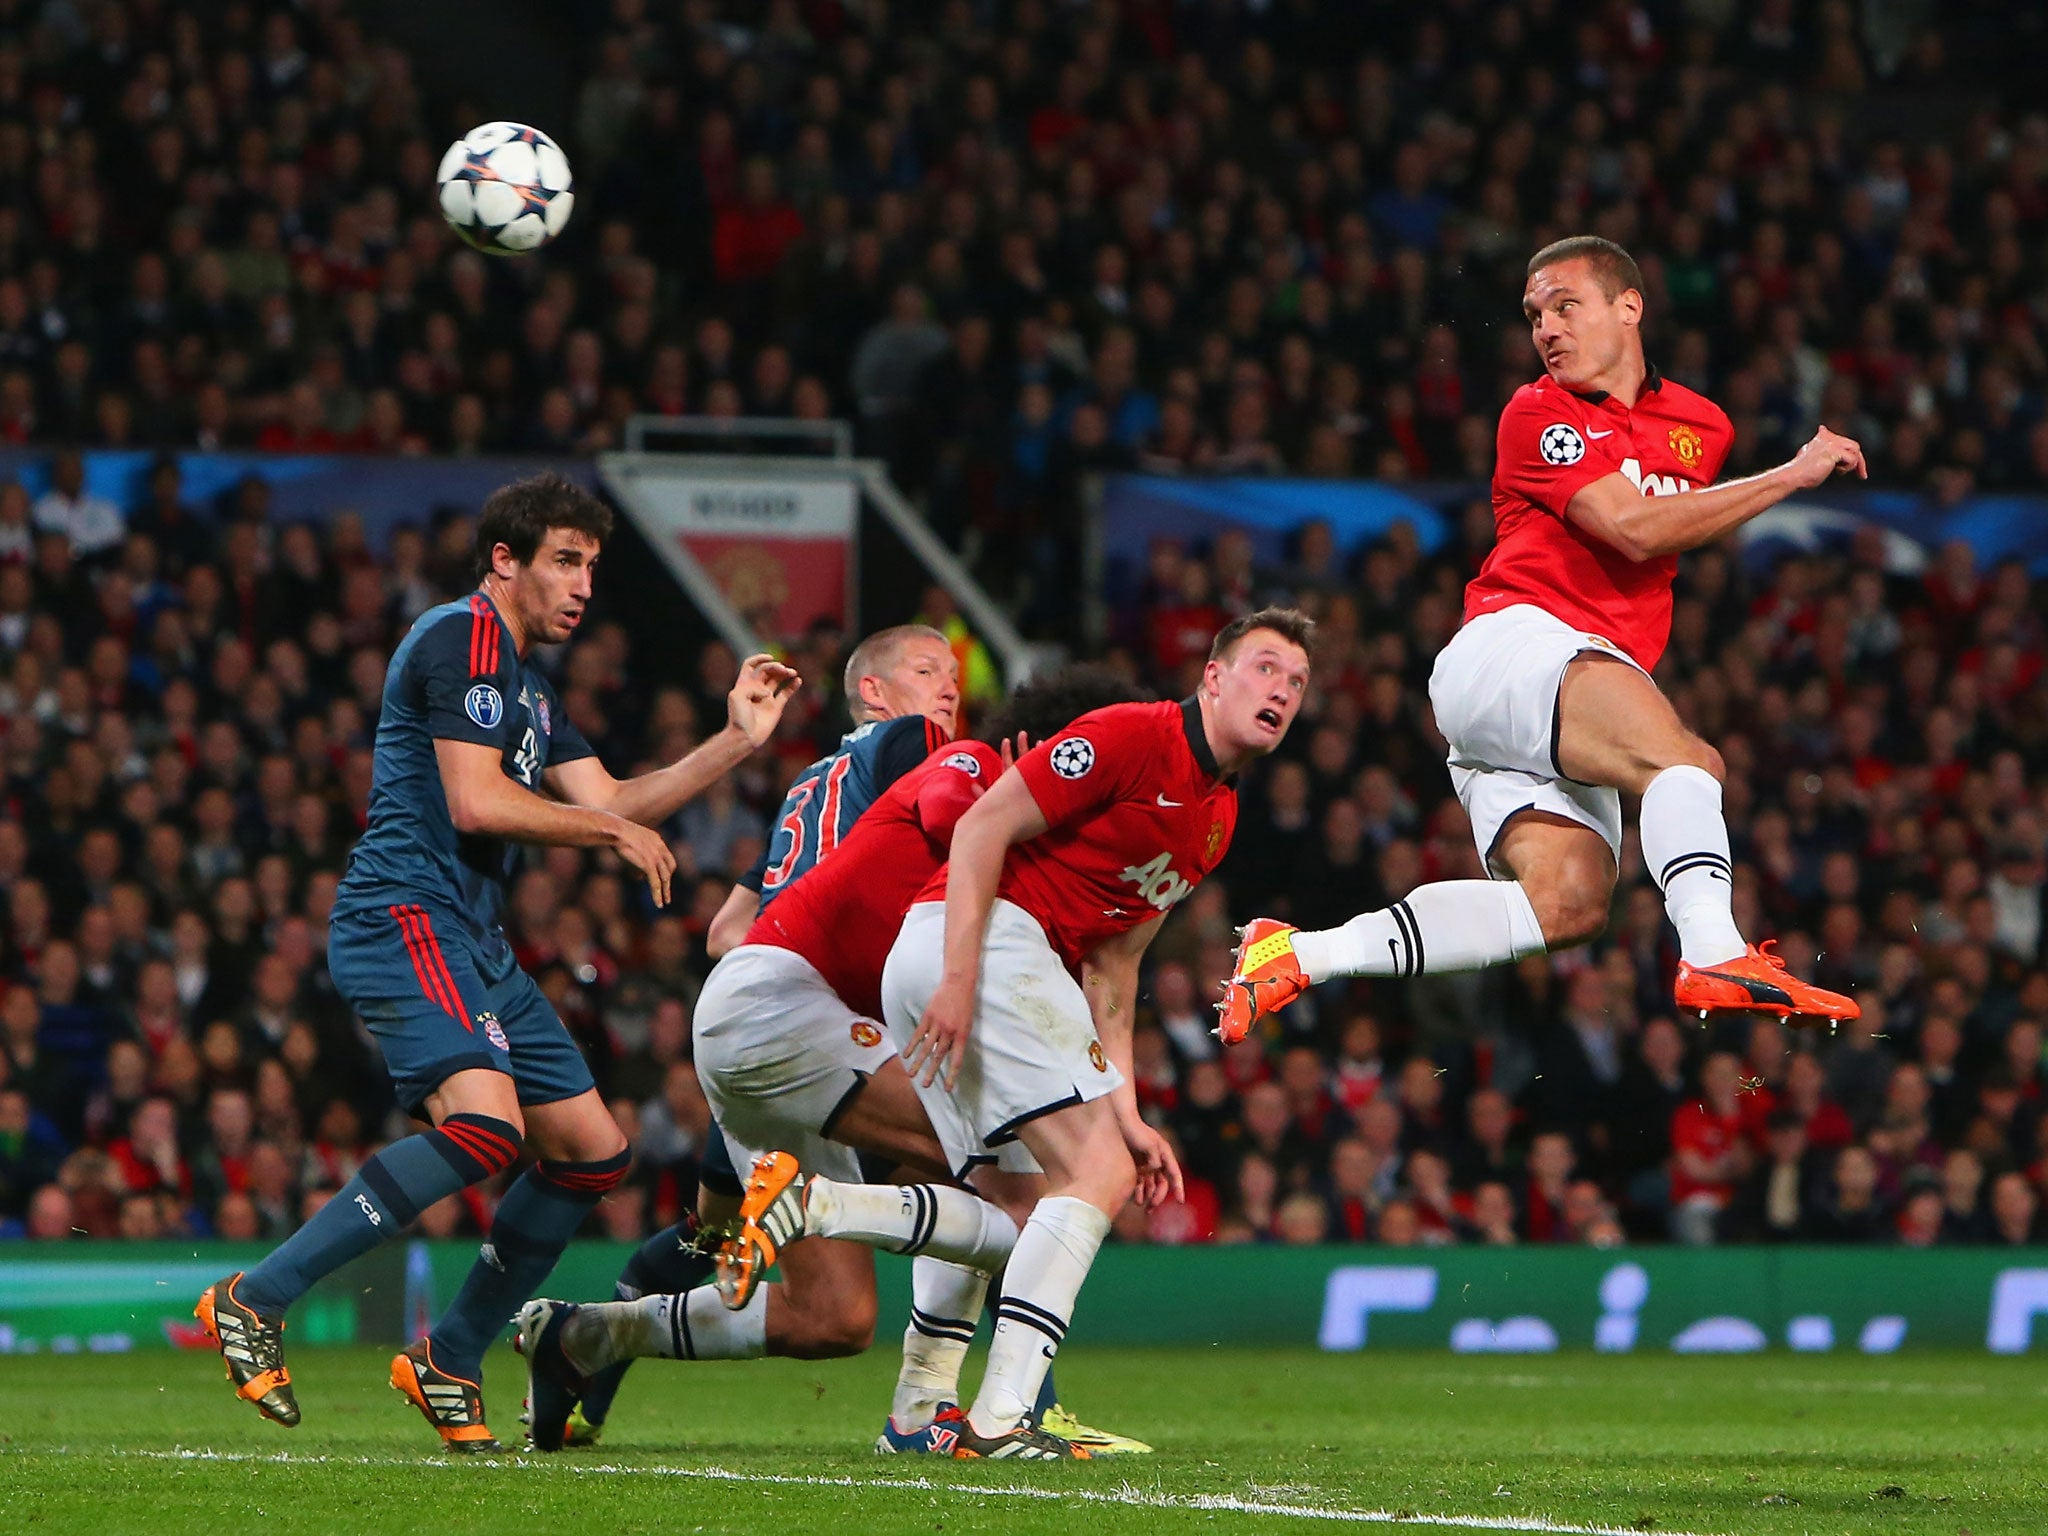 Nemanja Vidic opens the scoring for Manchester United with a fine header